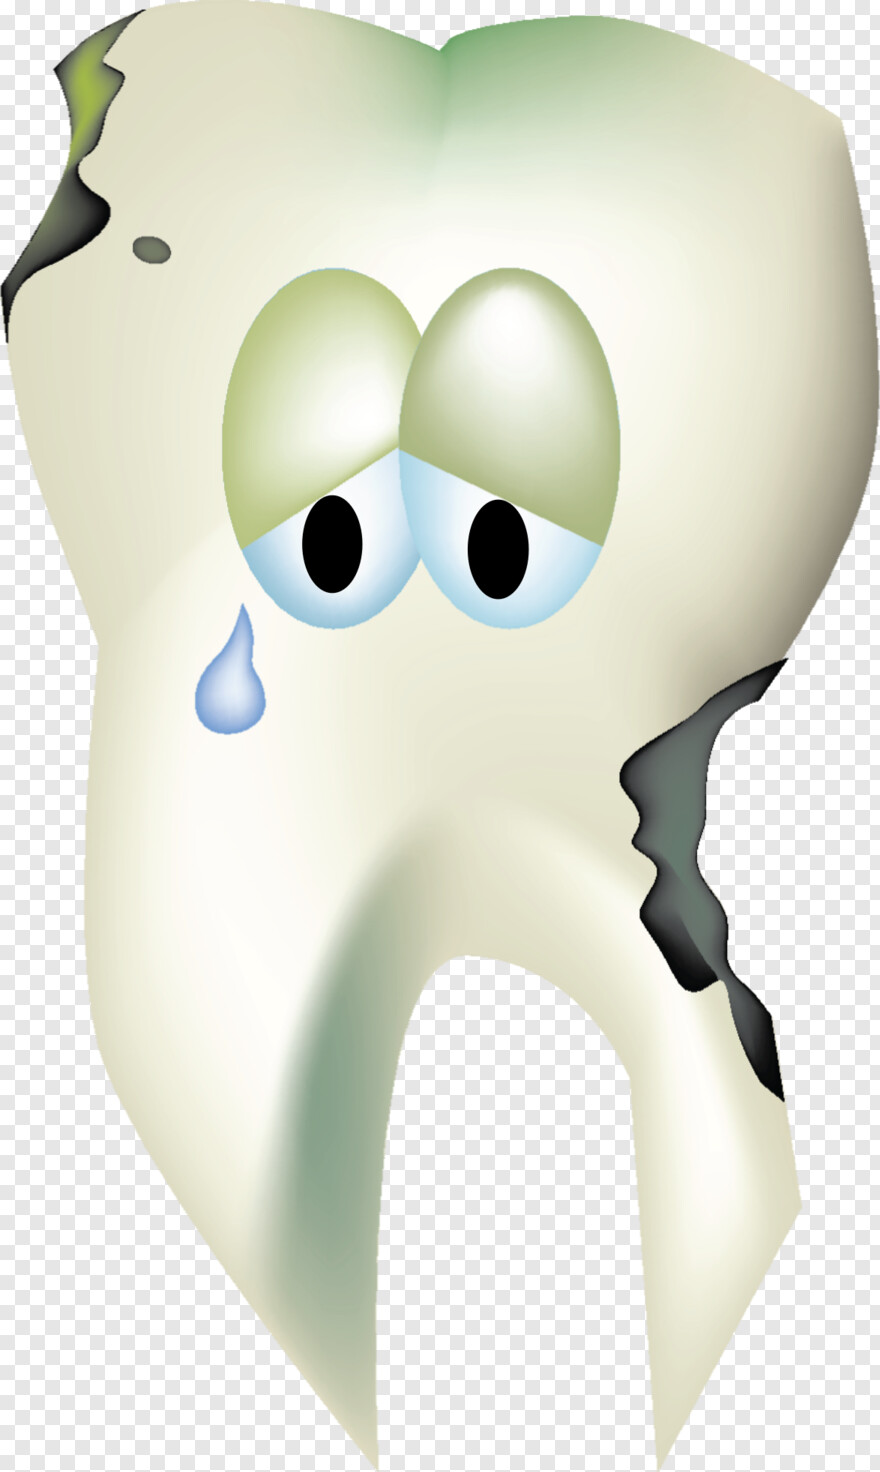 tooth-clipart # 479245